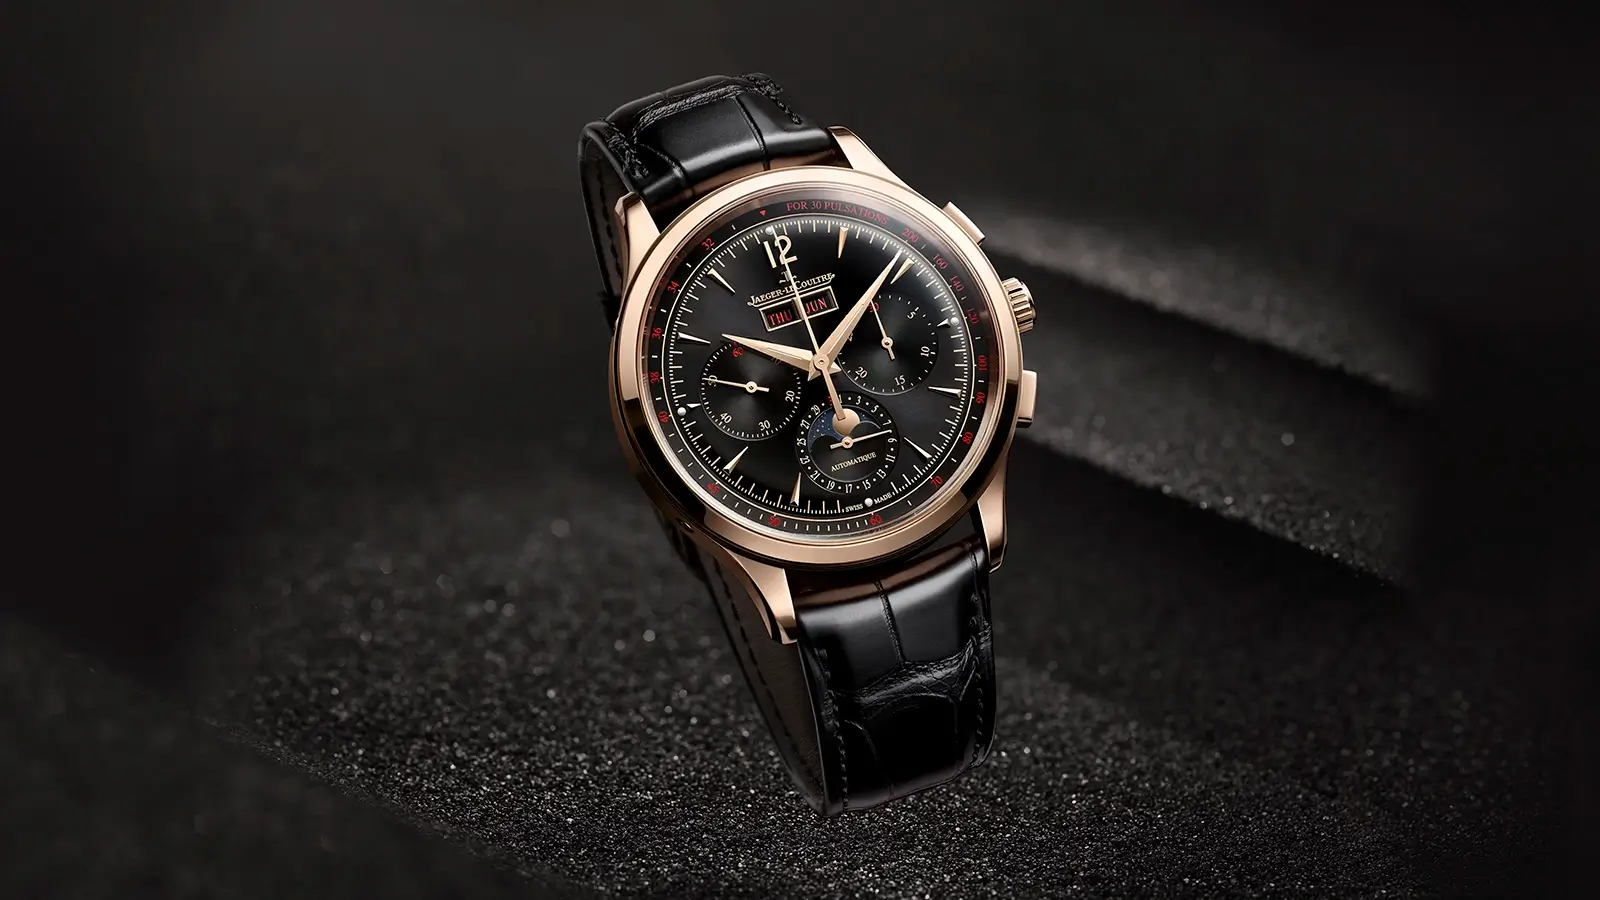 The Jaeger-LeCoultre Master Control Chronograph Calendar Pink Gold with a Black Dial